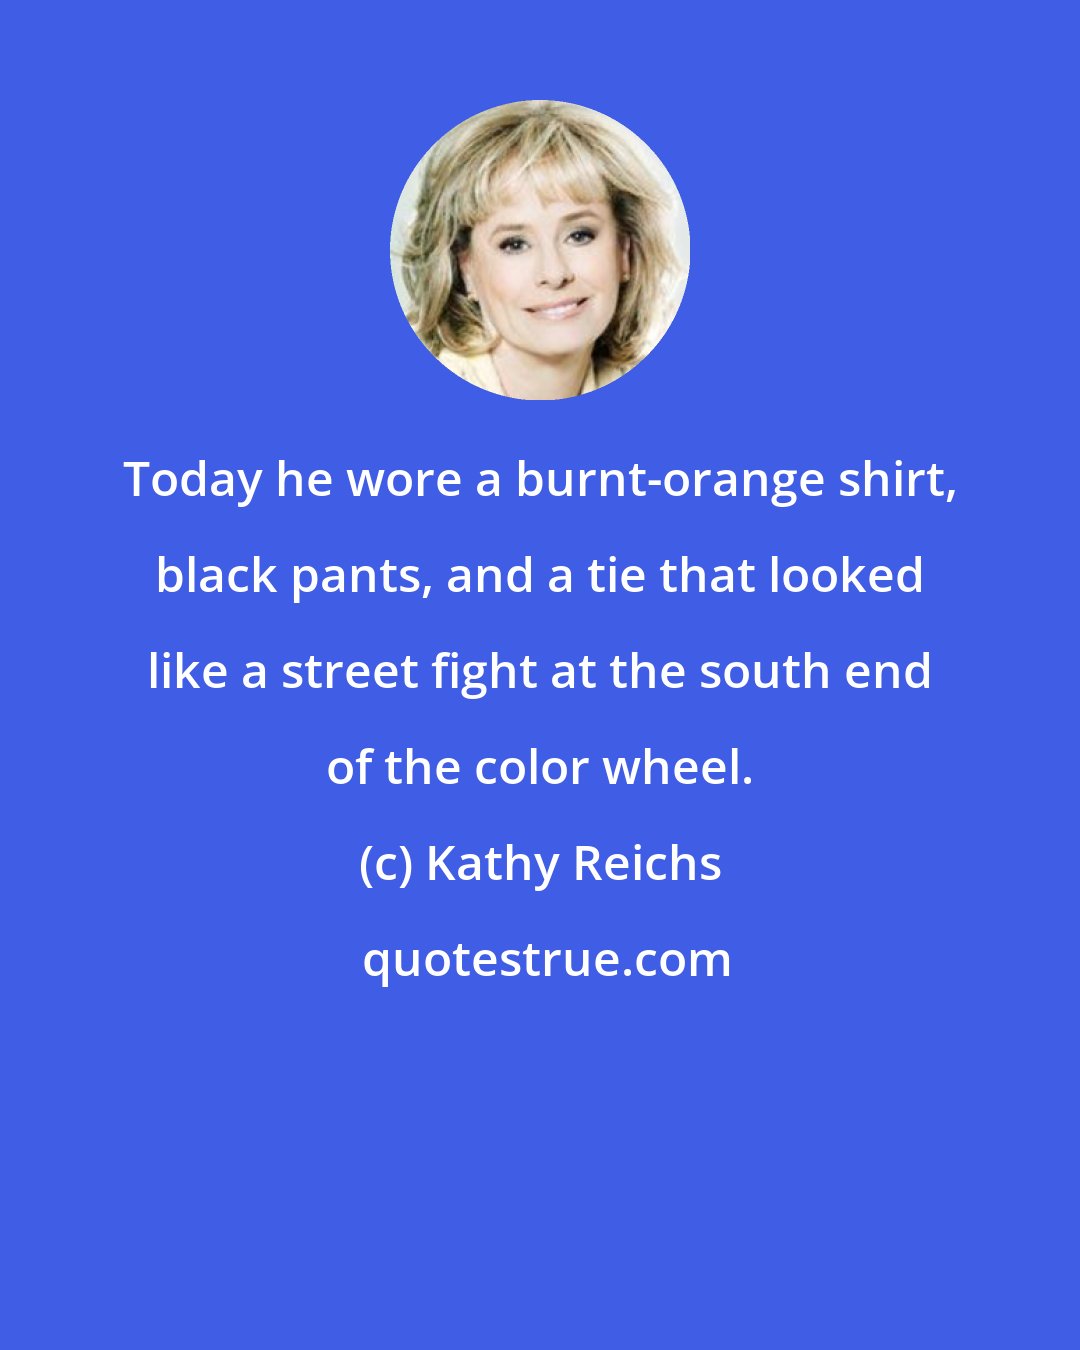 Kathy Reichs: Today he wore a burnt-orange shirt, black pants, and a tie that looked like a street fight at the south end of the color wheel.